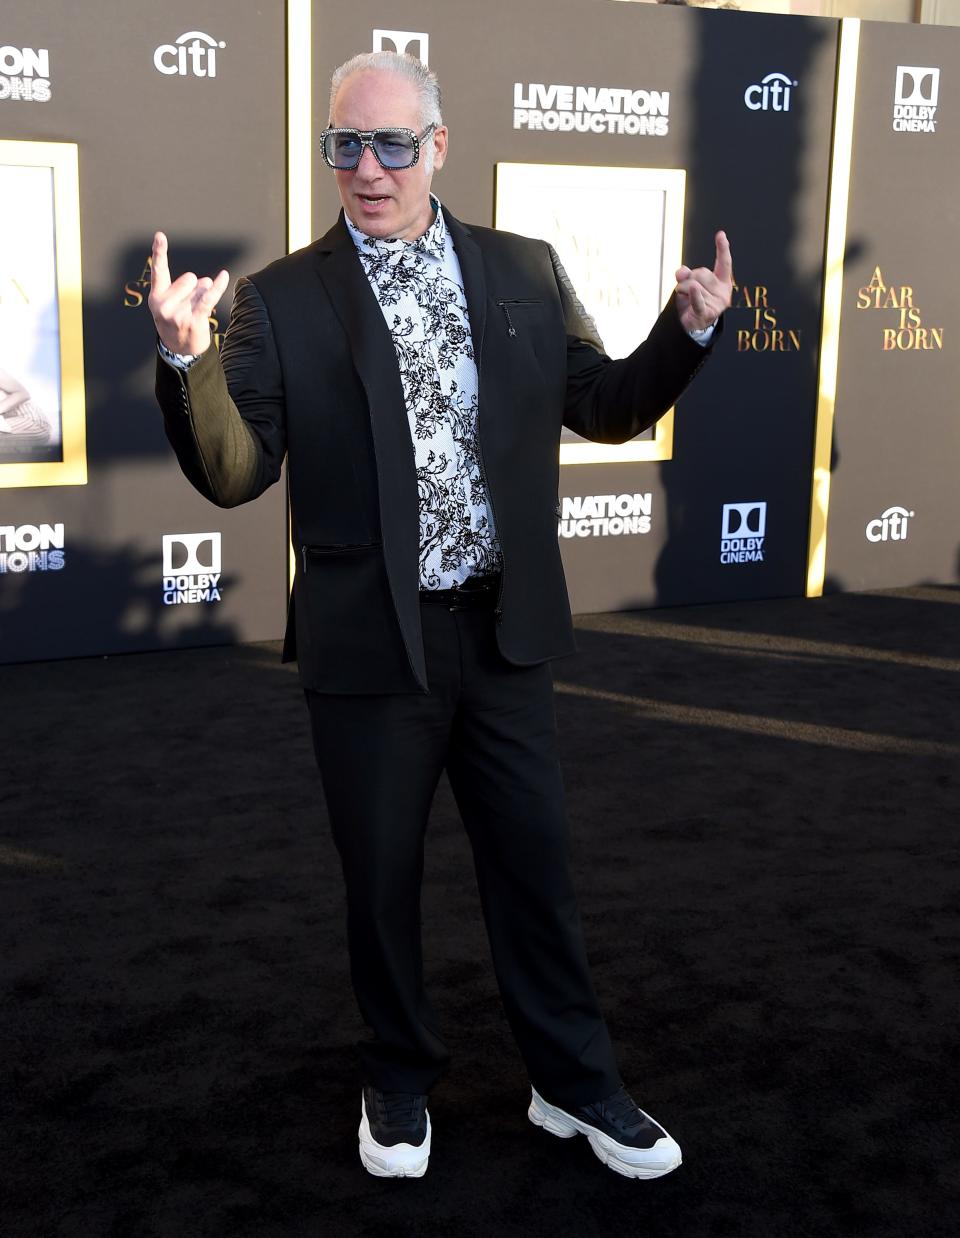 Andrew Dice Clay arrives at the Los Angeles premiere of "A Star Is Born" on Monday, Sept. 24, 2018, at the Shrine Auditorium.